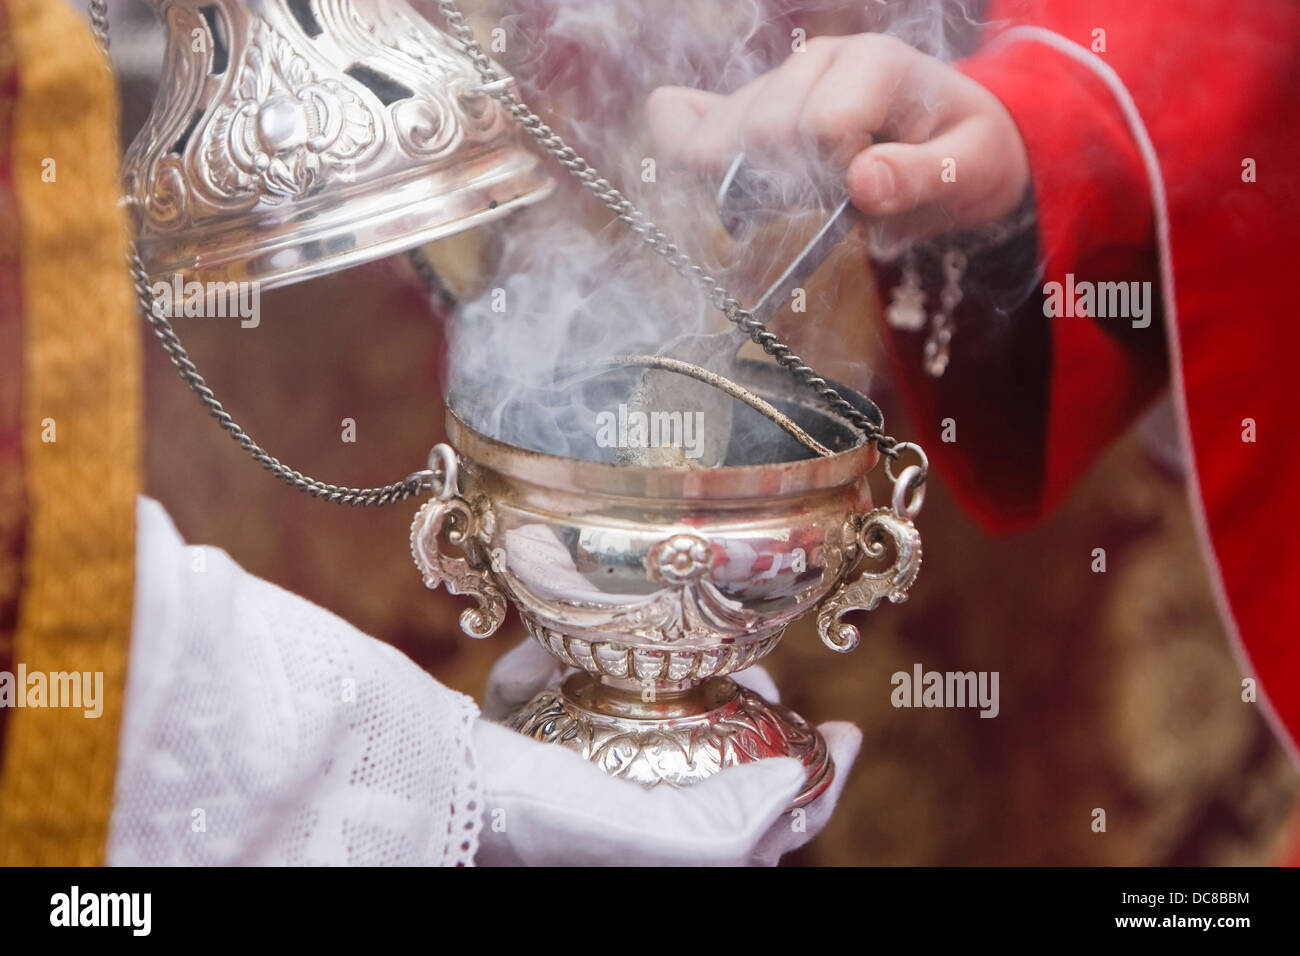 Censer of silver or alpaca to burn incense in the holy week, Spain Stock Photo